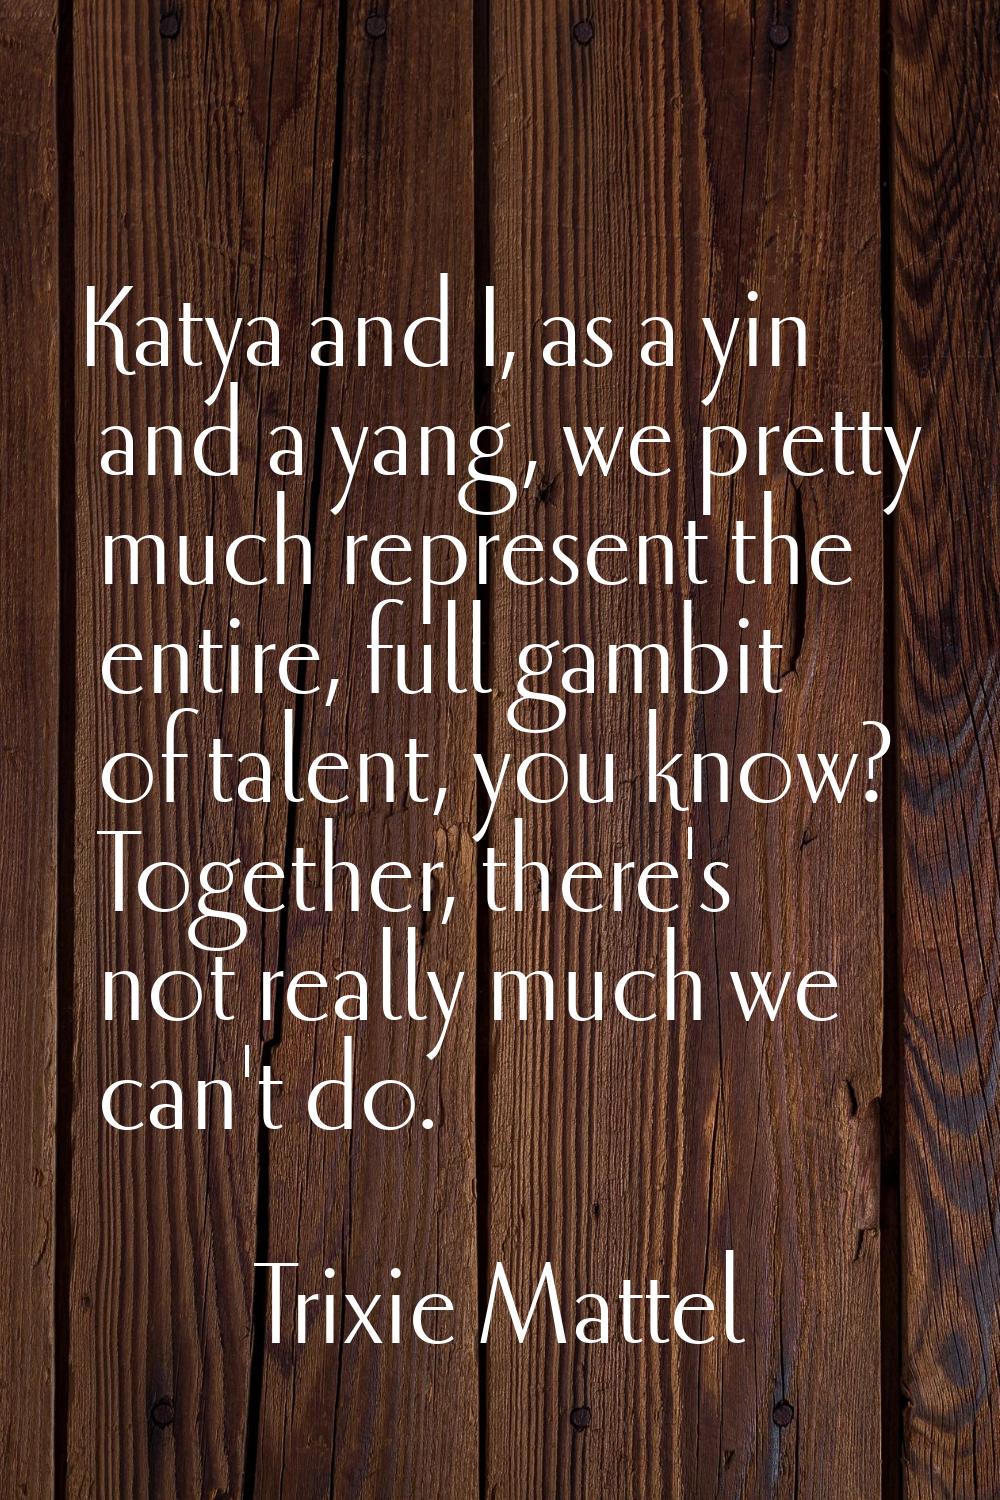 Katya and I, as a yin and a yang, we pretty much represent the entire, full gambit of talent, you k